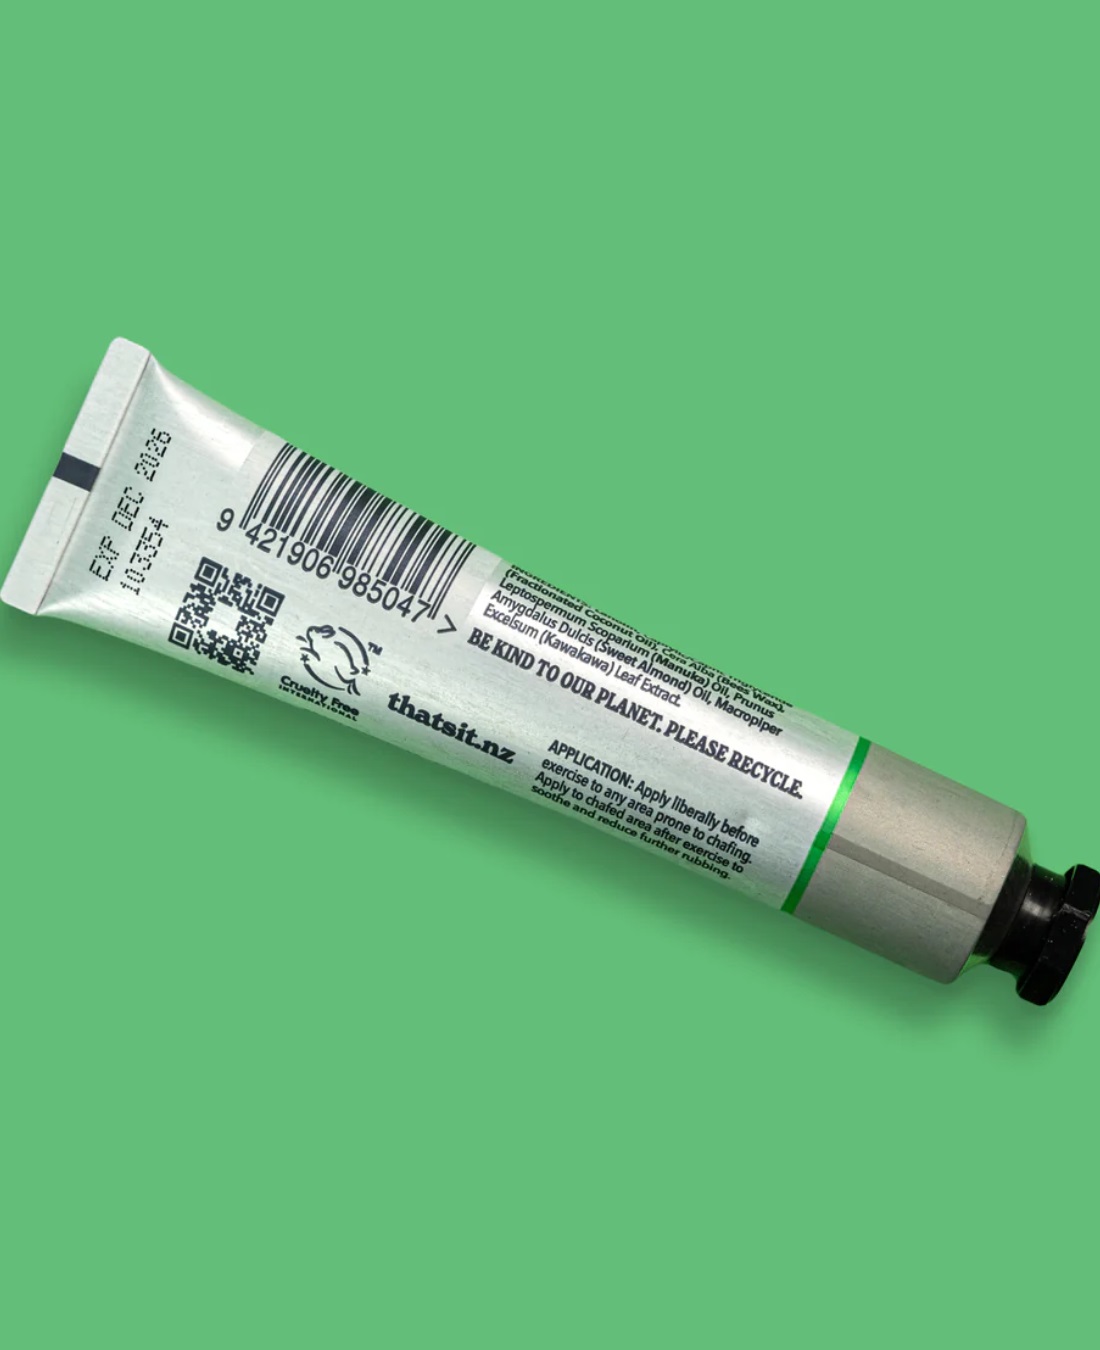 That's it anti chafe gel in silver aluminium tube on green background